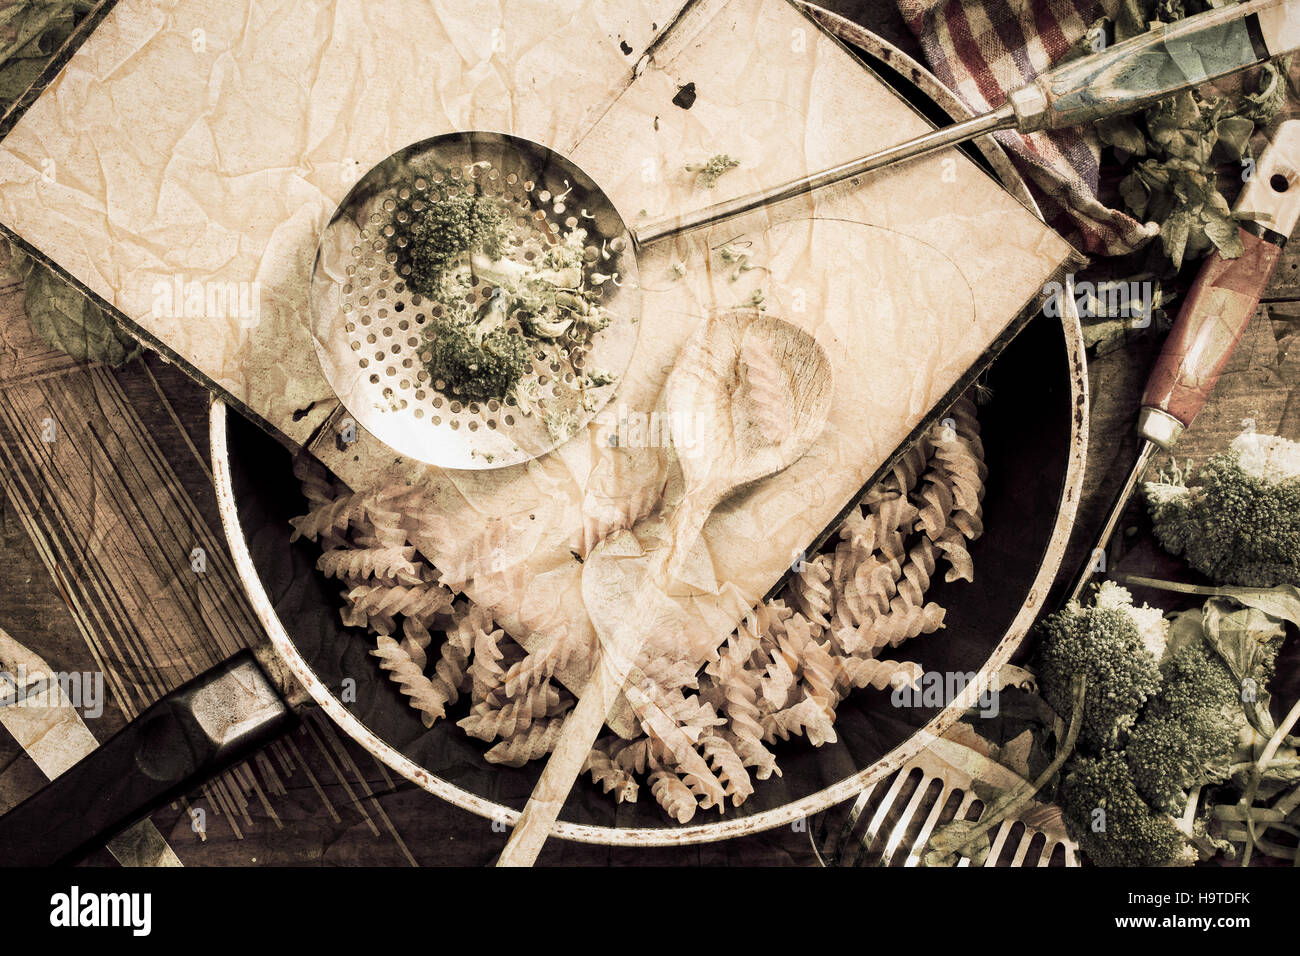 Cooking book with spoon, noodles and broccoli in frying pan - vintage textured retro image, arranged on an old wooden table Stock Photo